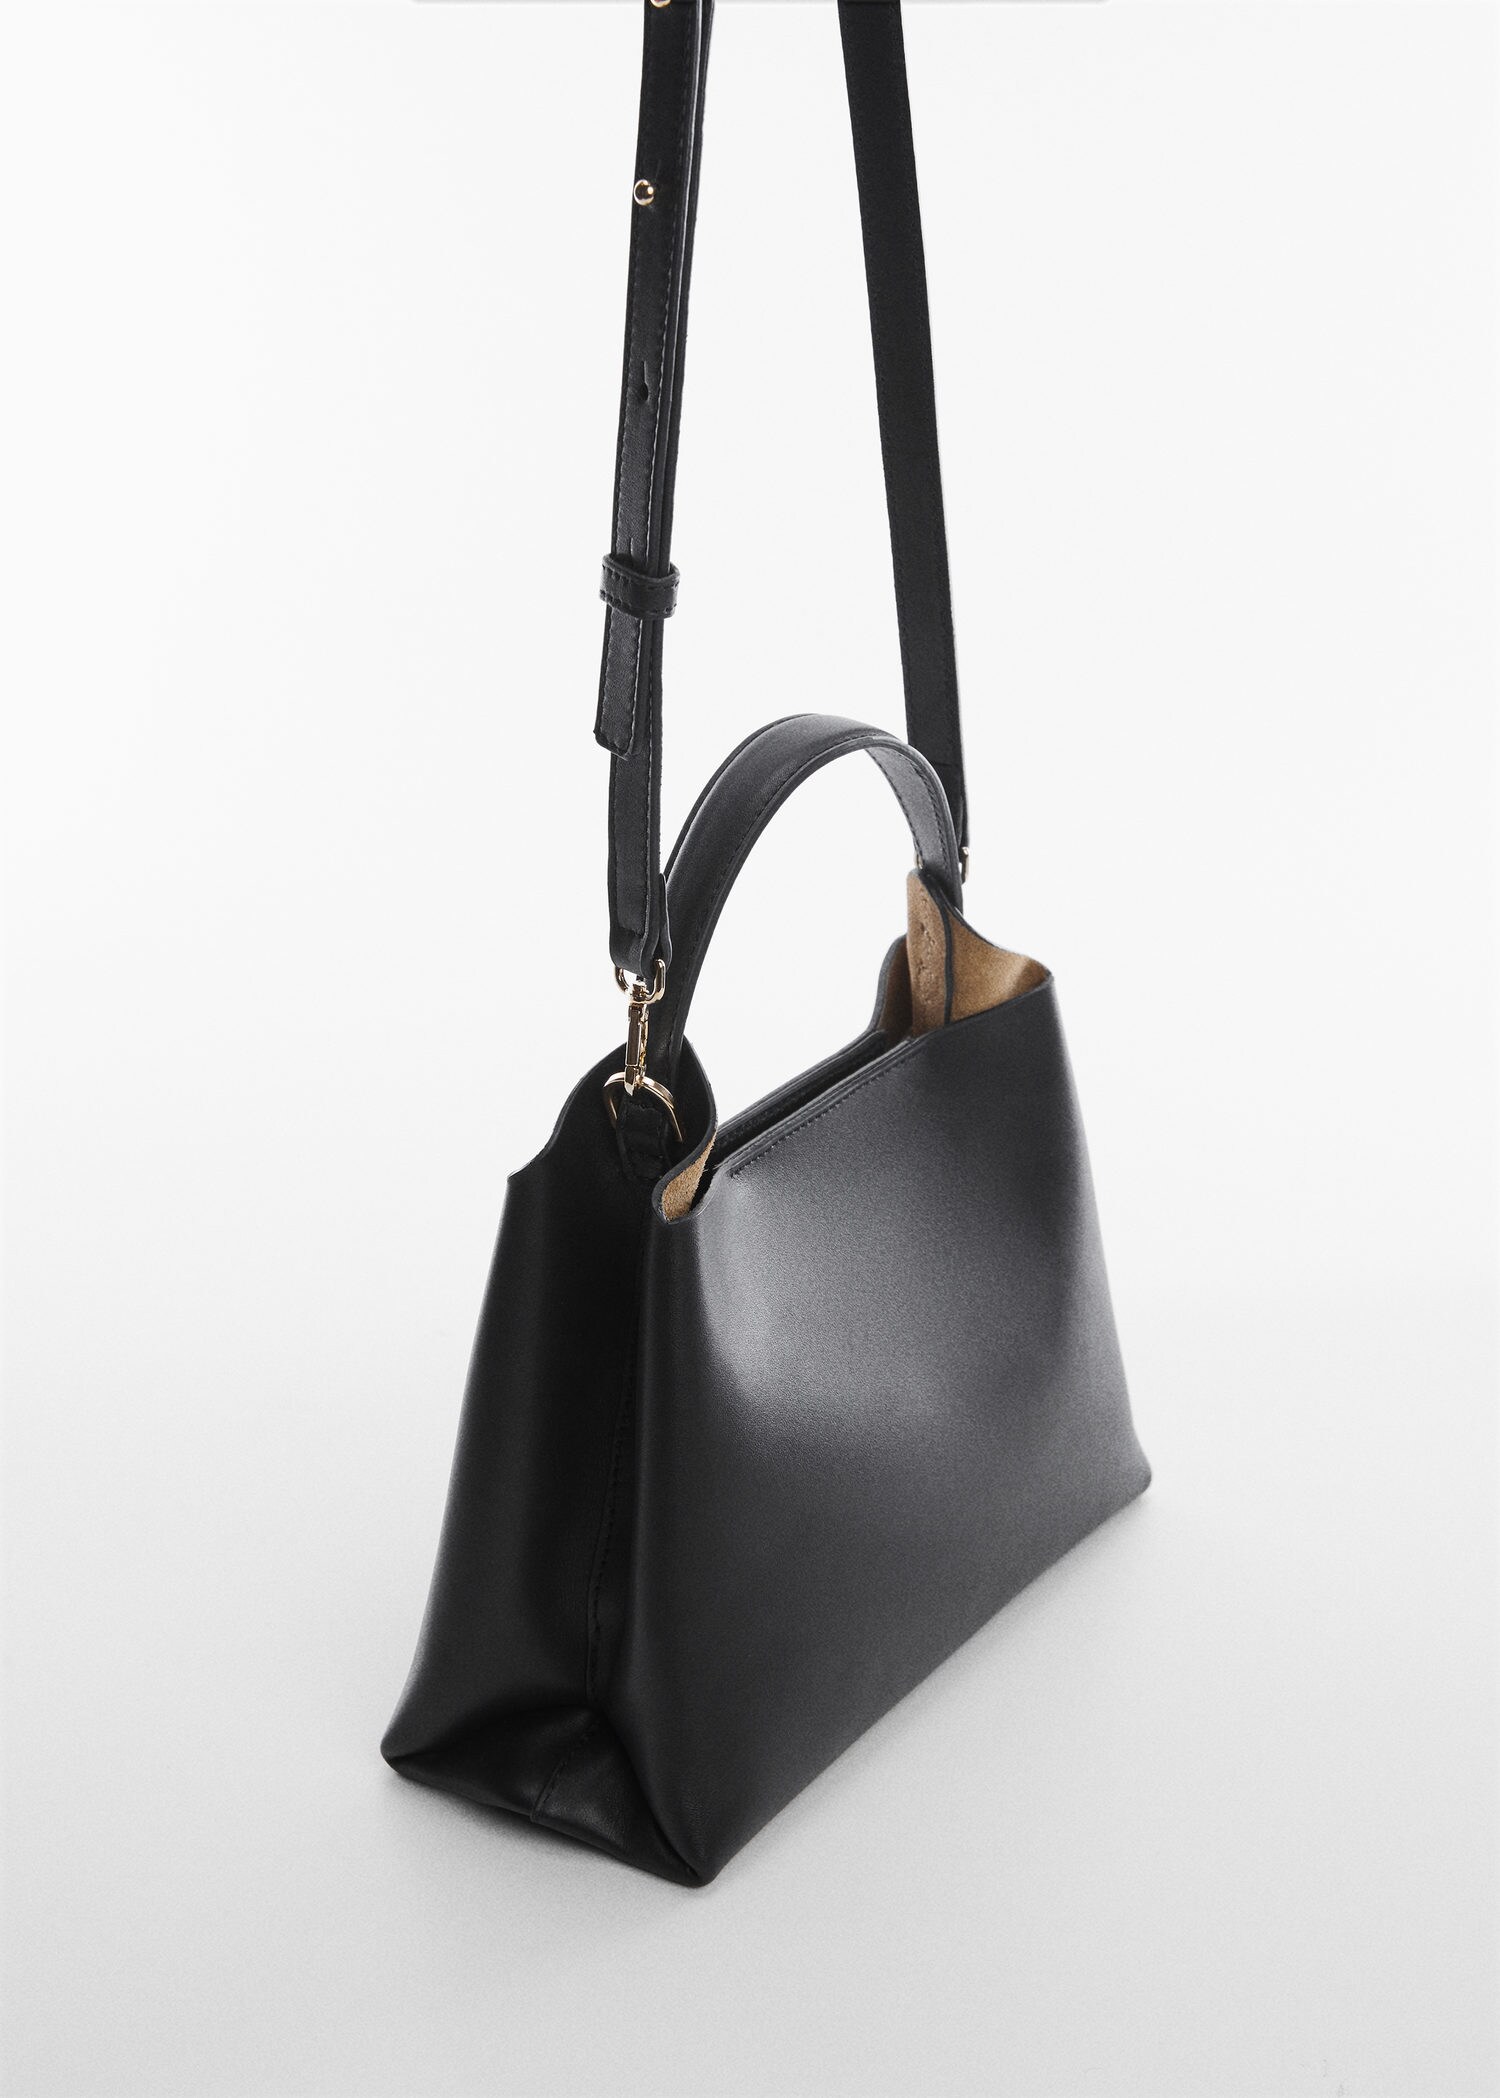 New Designer Vegan Leather Handbags Are Made From Mangoes